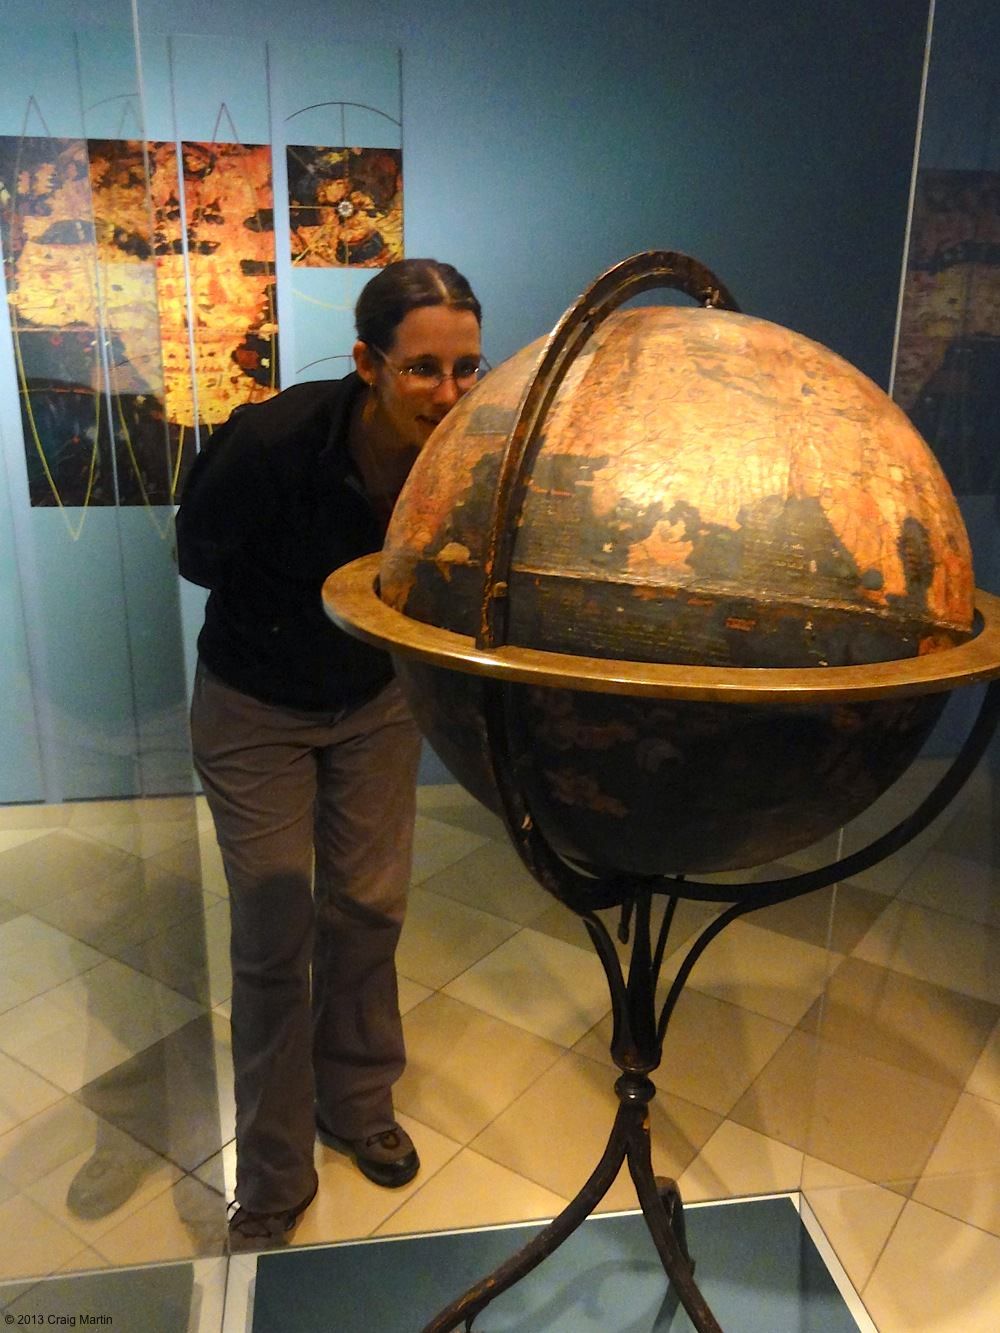 This globe is OLD.